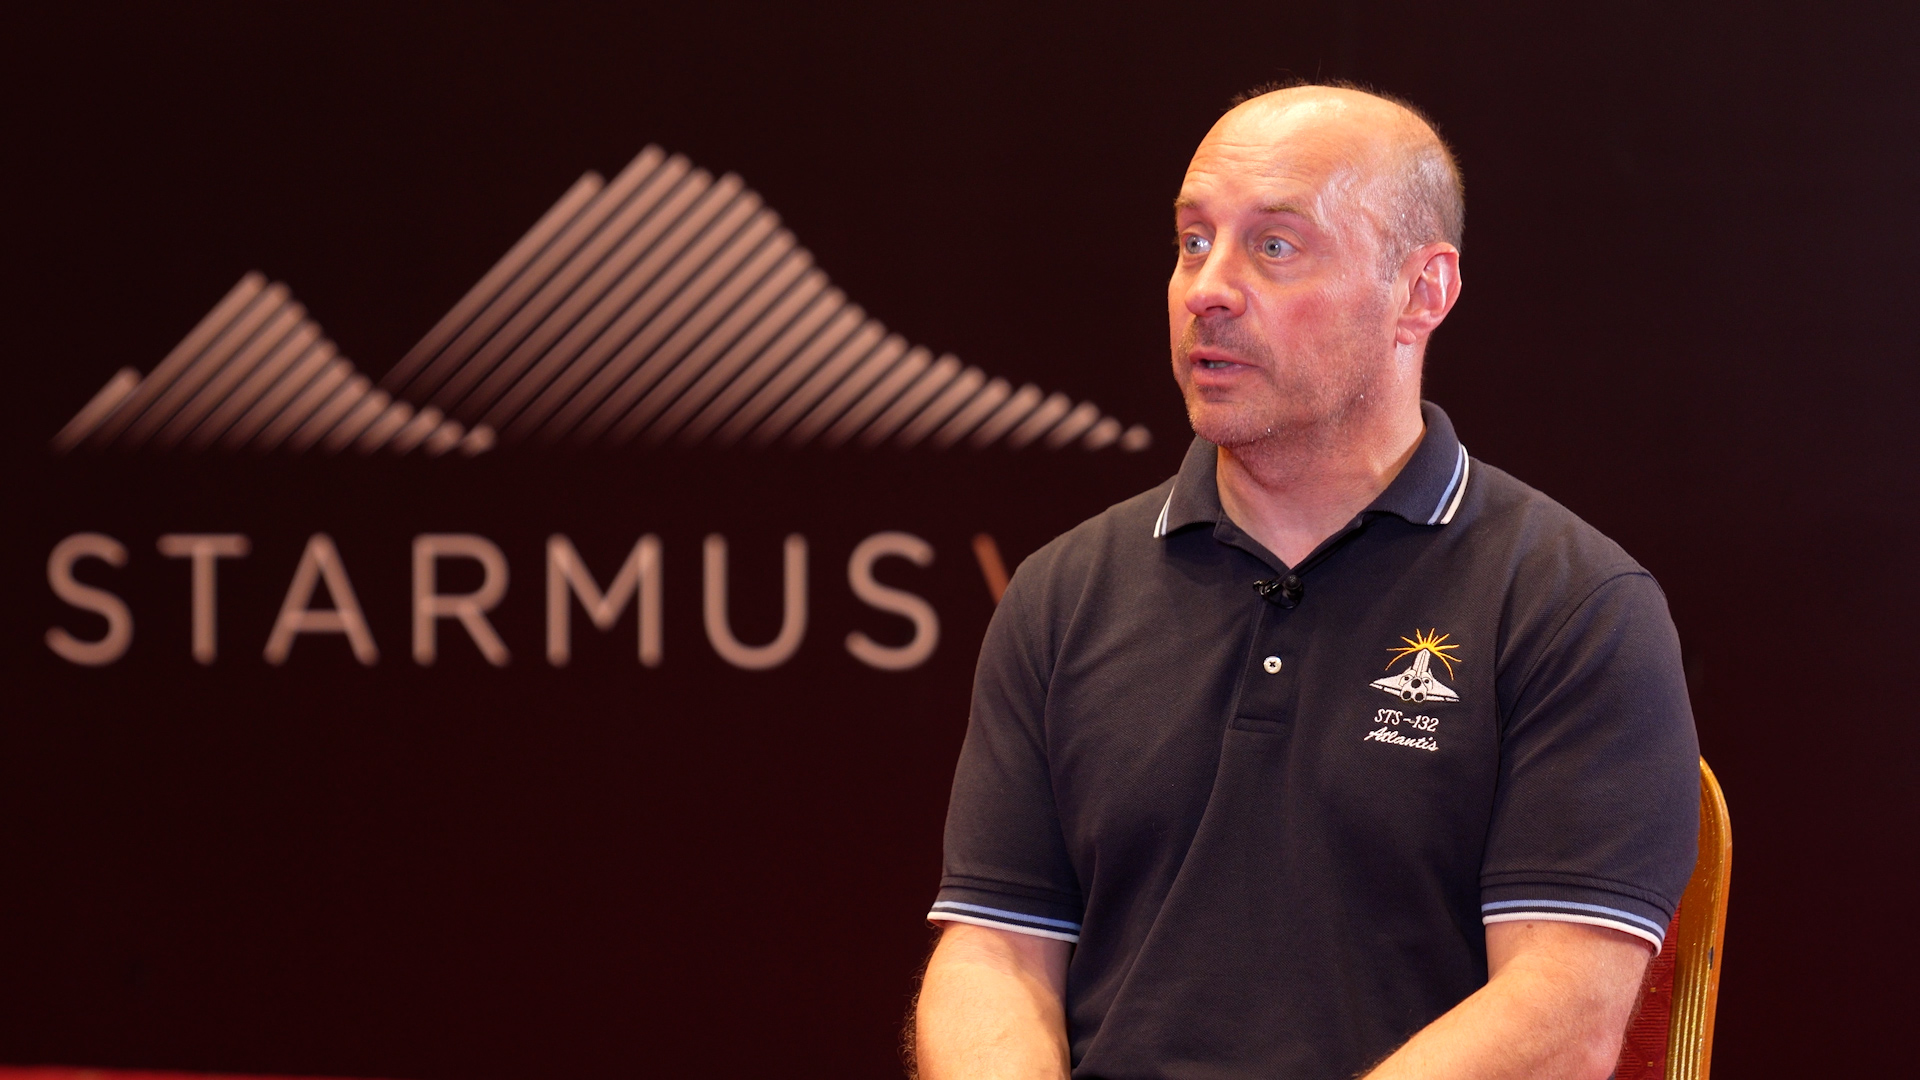 Bringing NASA and SpaceX expertise to Yerevan’s Starmus Festival